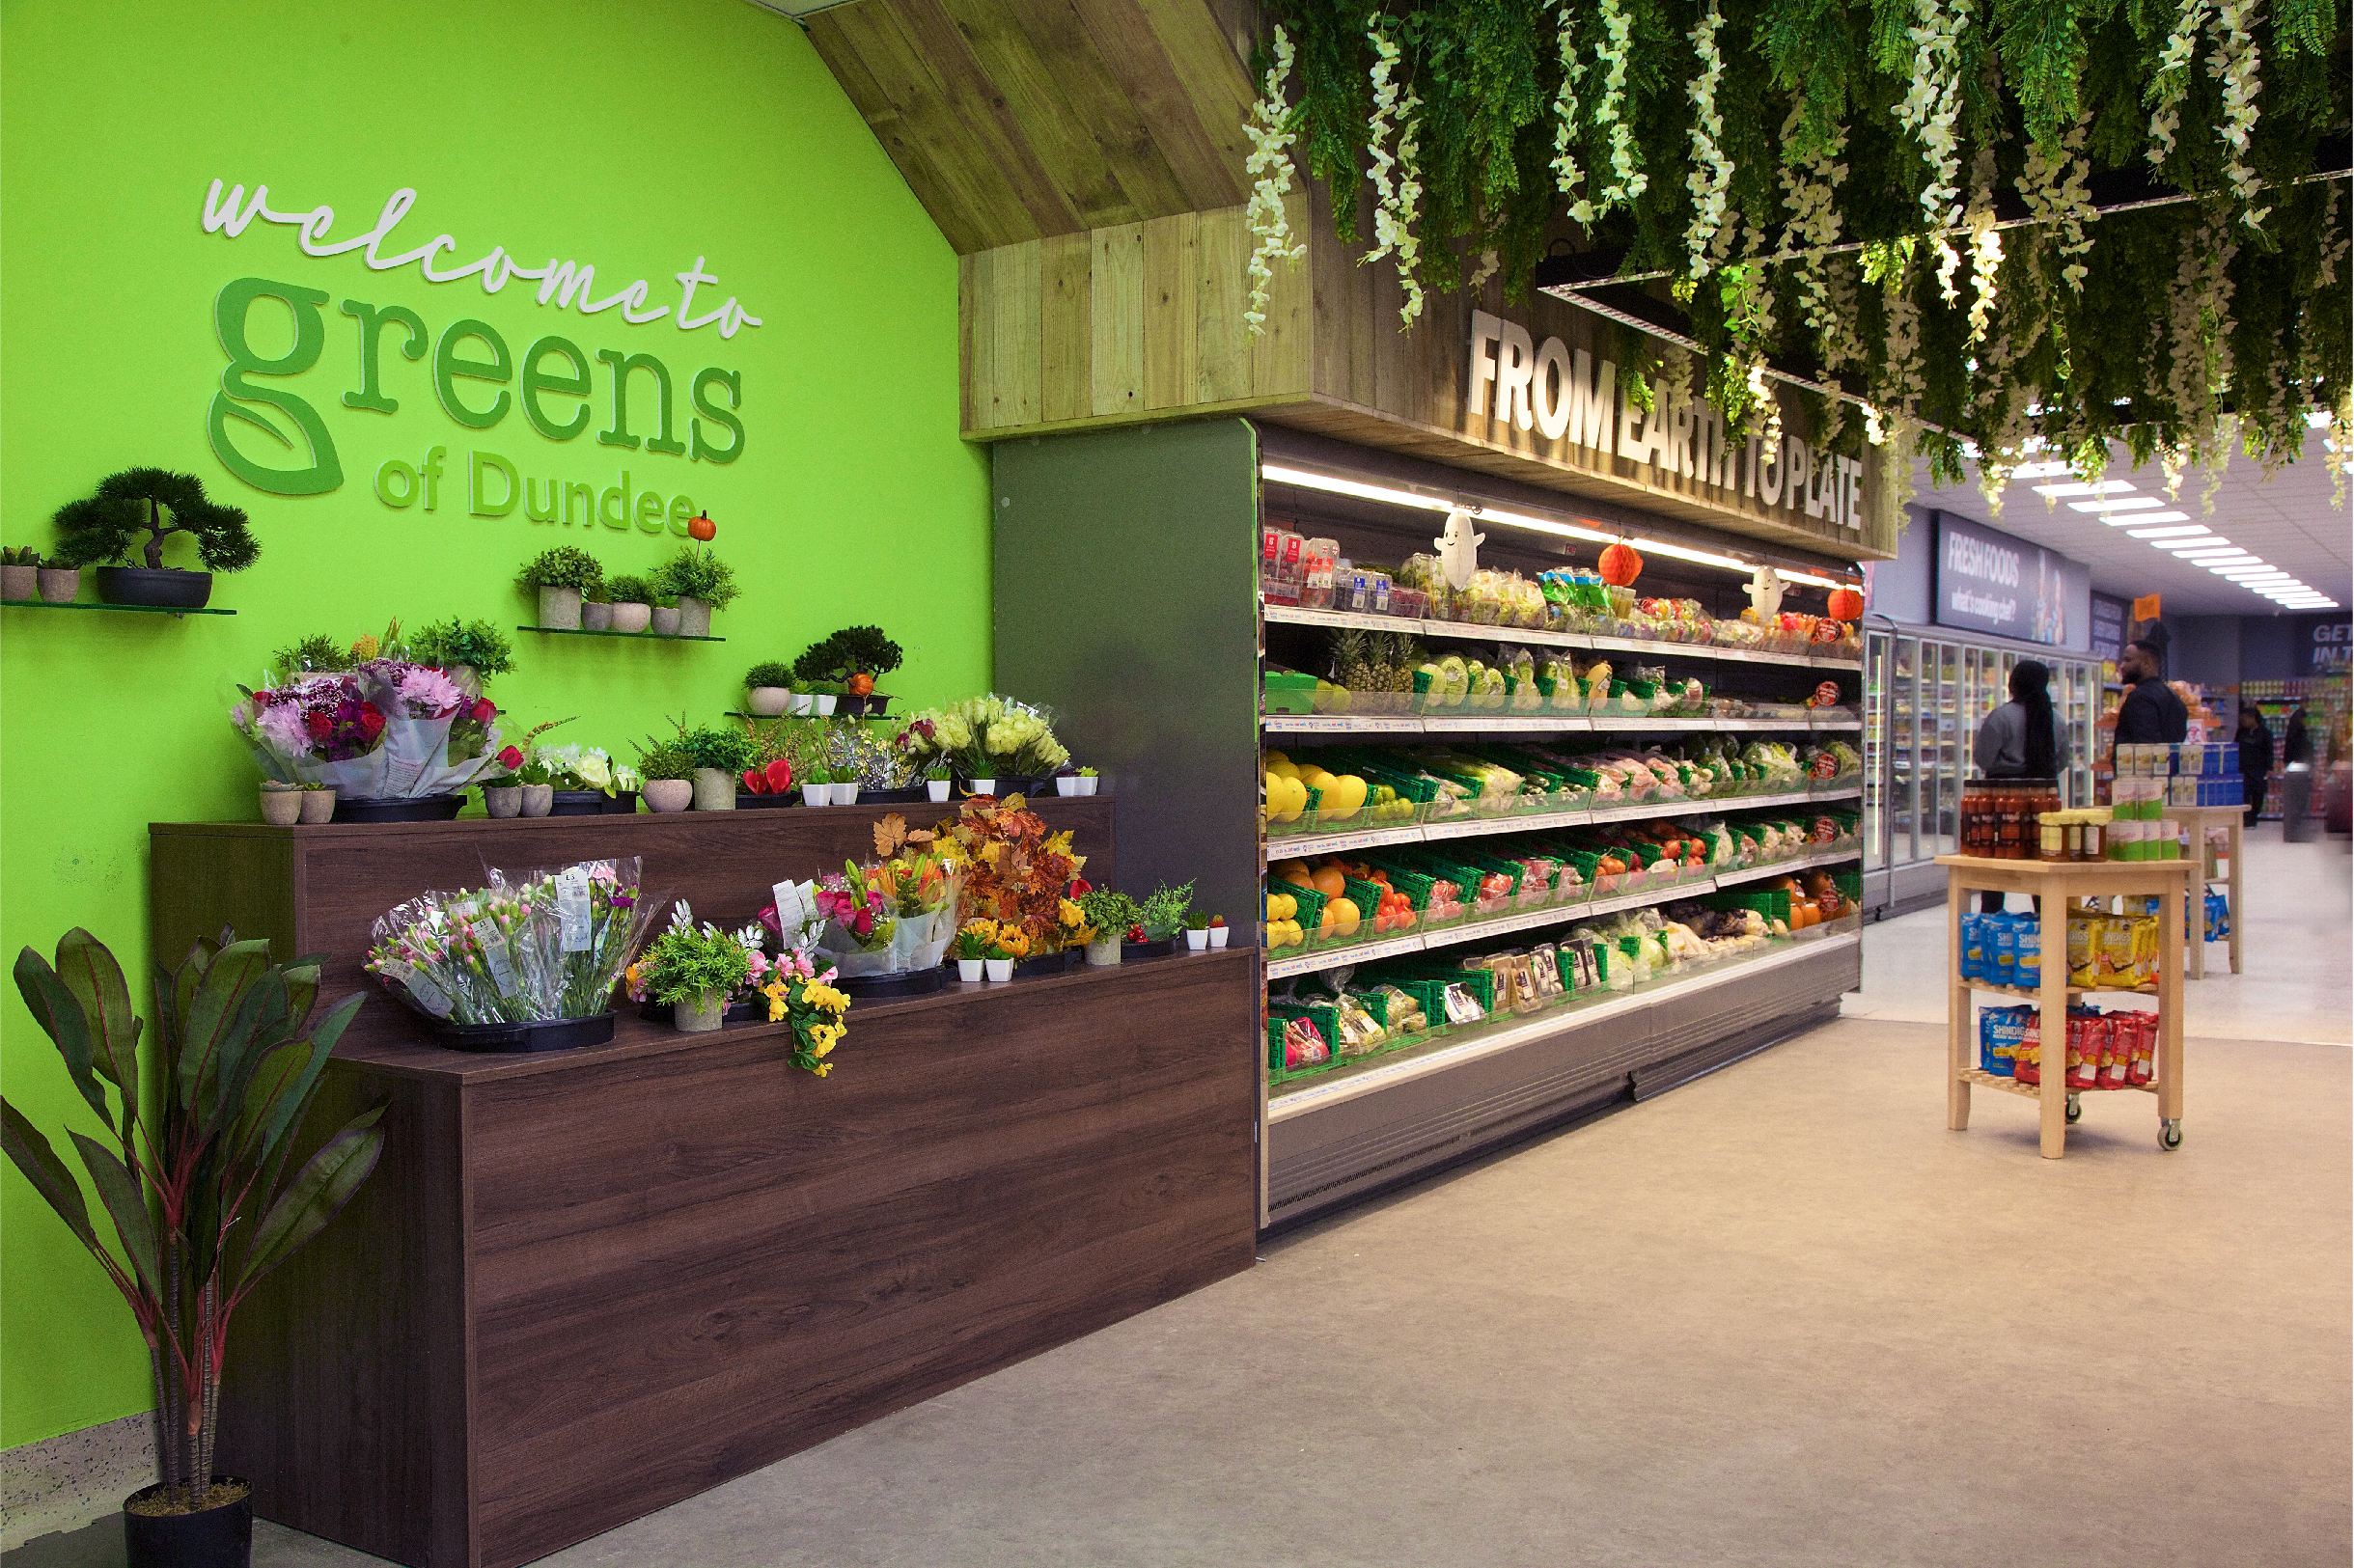 Greens of Dundee greens retail Nisa